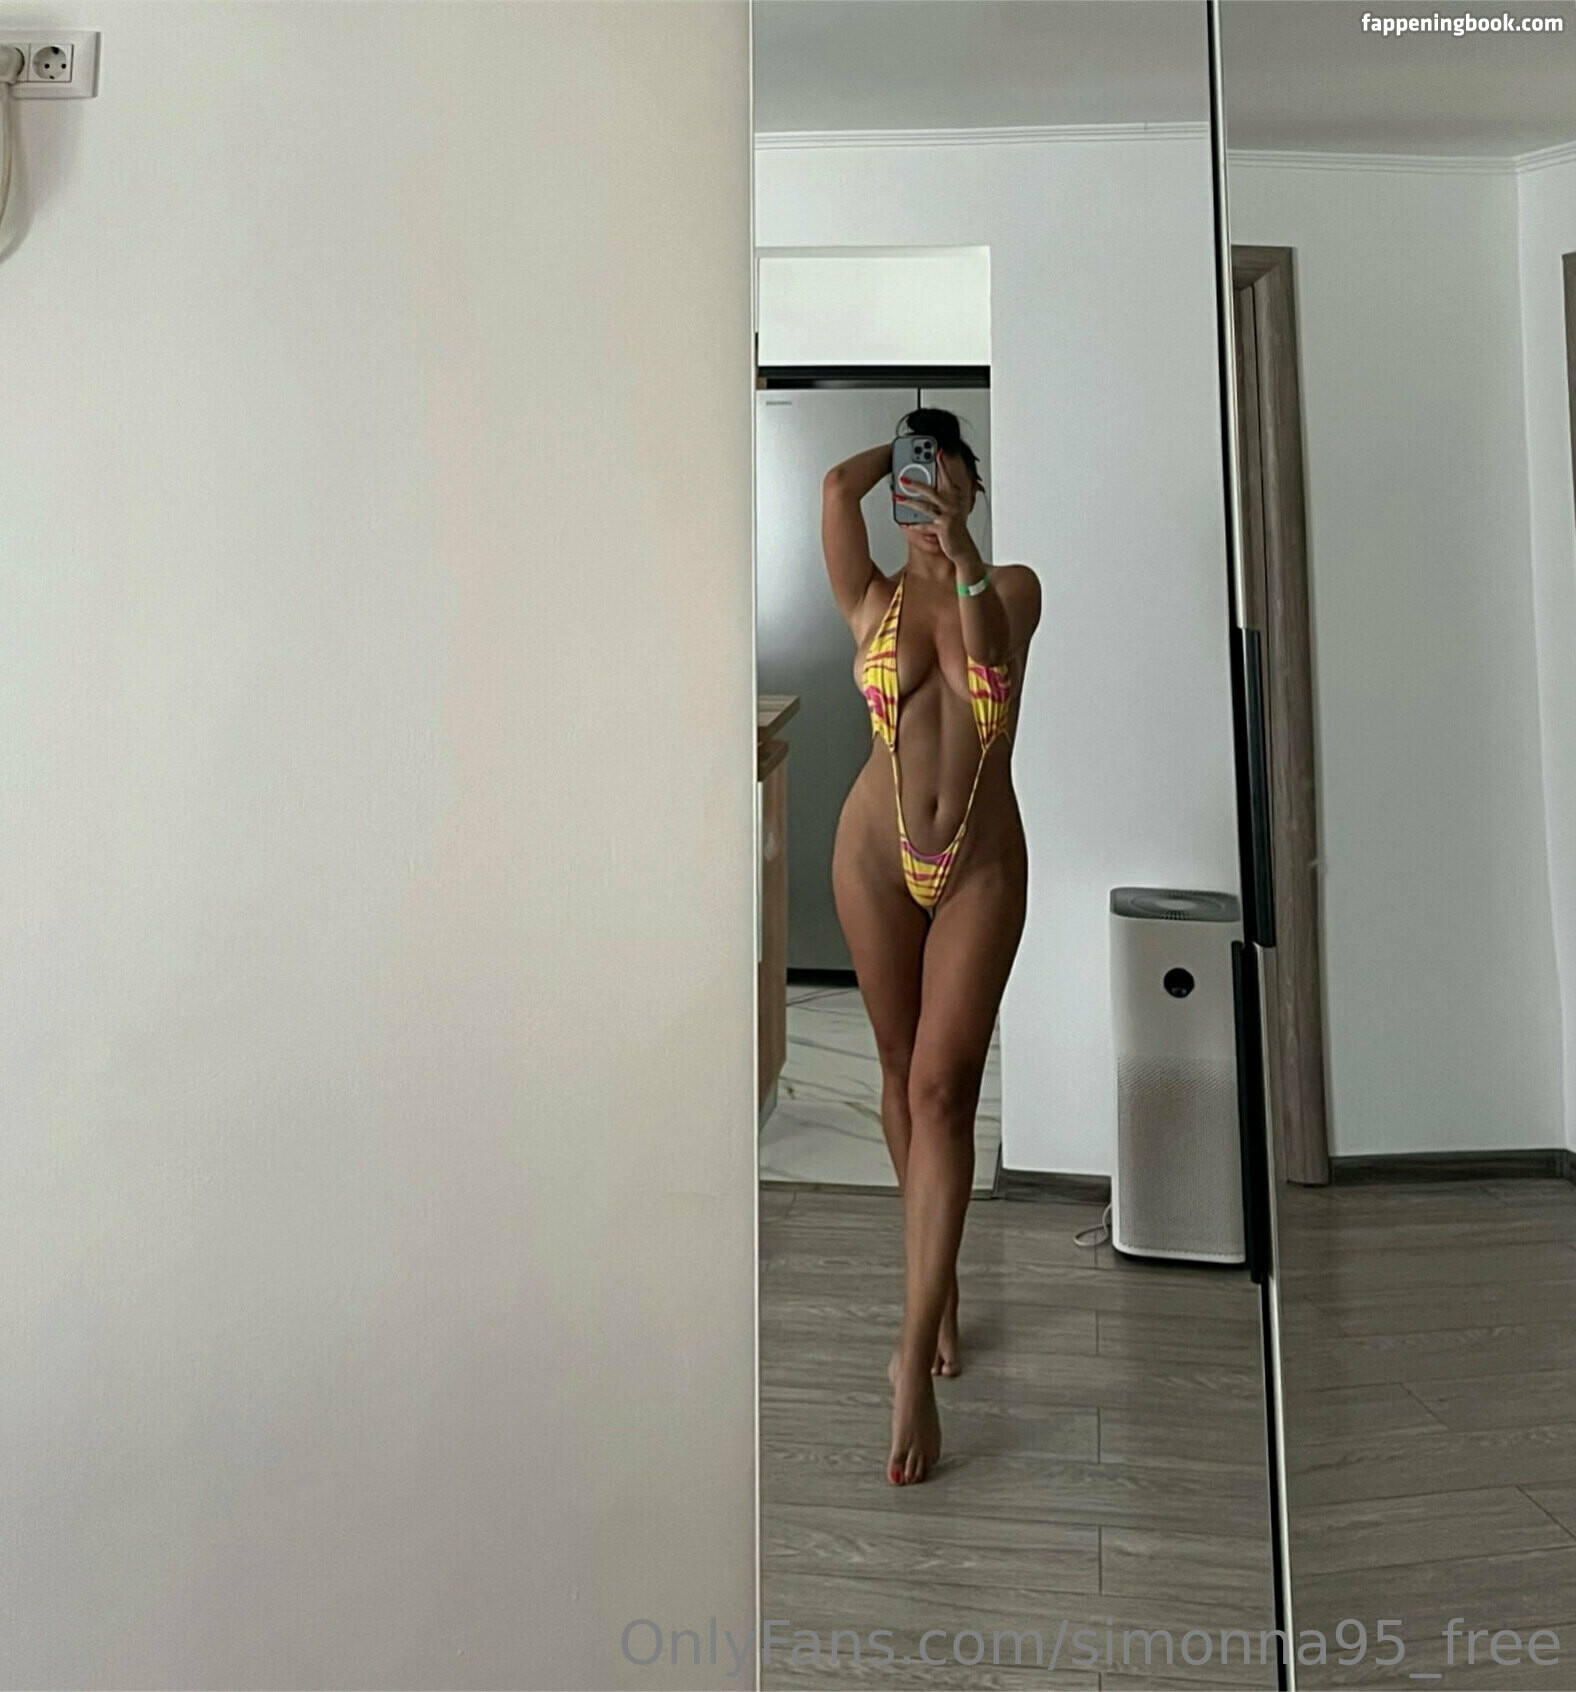 simonna95_free Nude OnlyFans Leaks